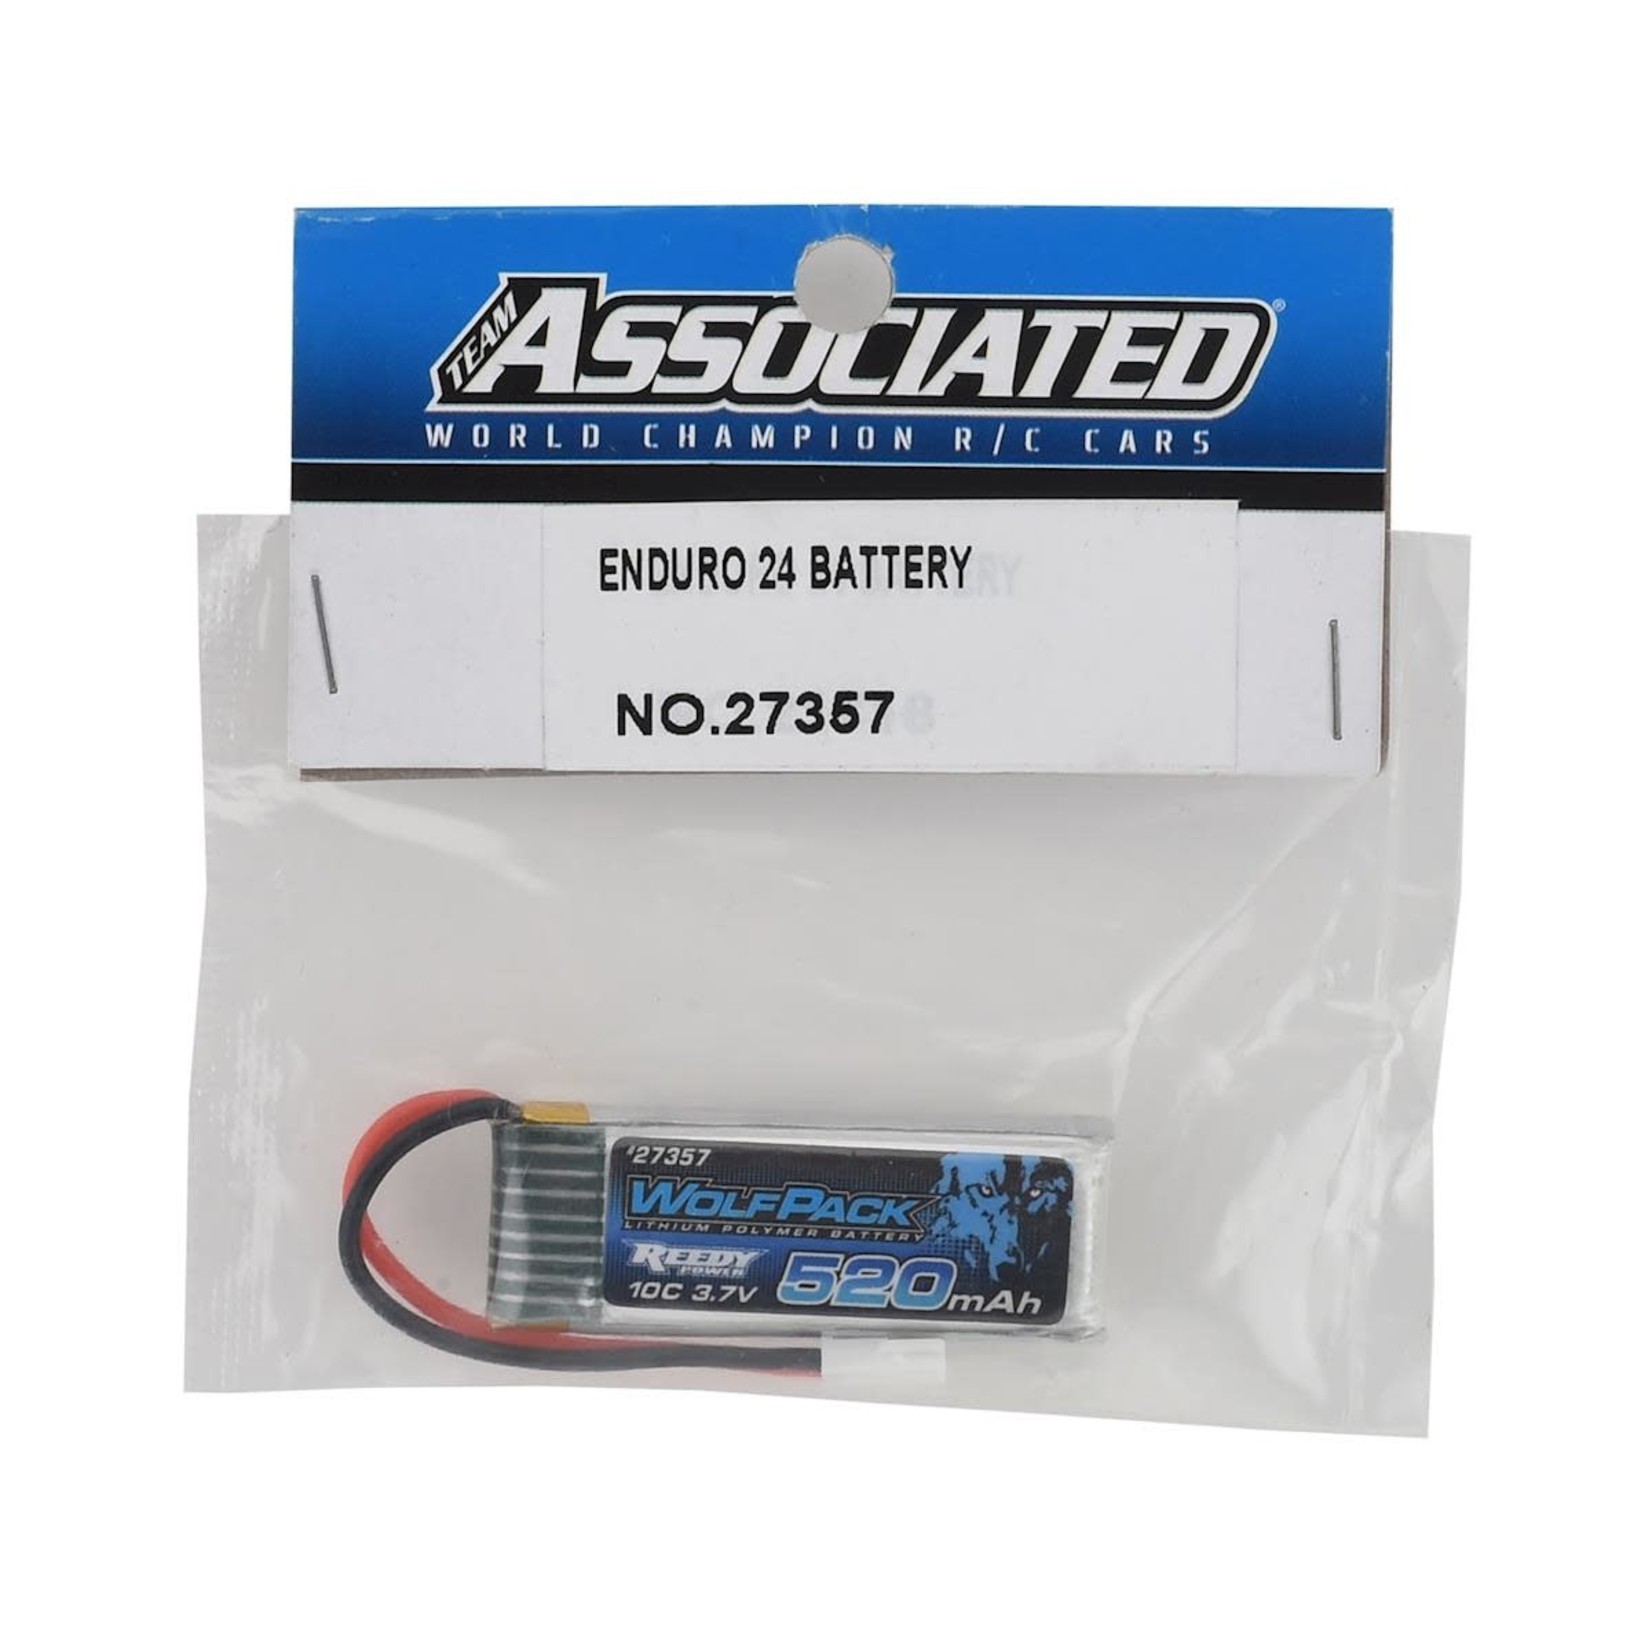 Reedy Reedy WolfPack 1S LiPo 10C Battery Pack w/Micro Connector (3.7V/520mAh) #27357